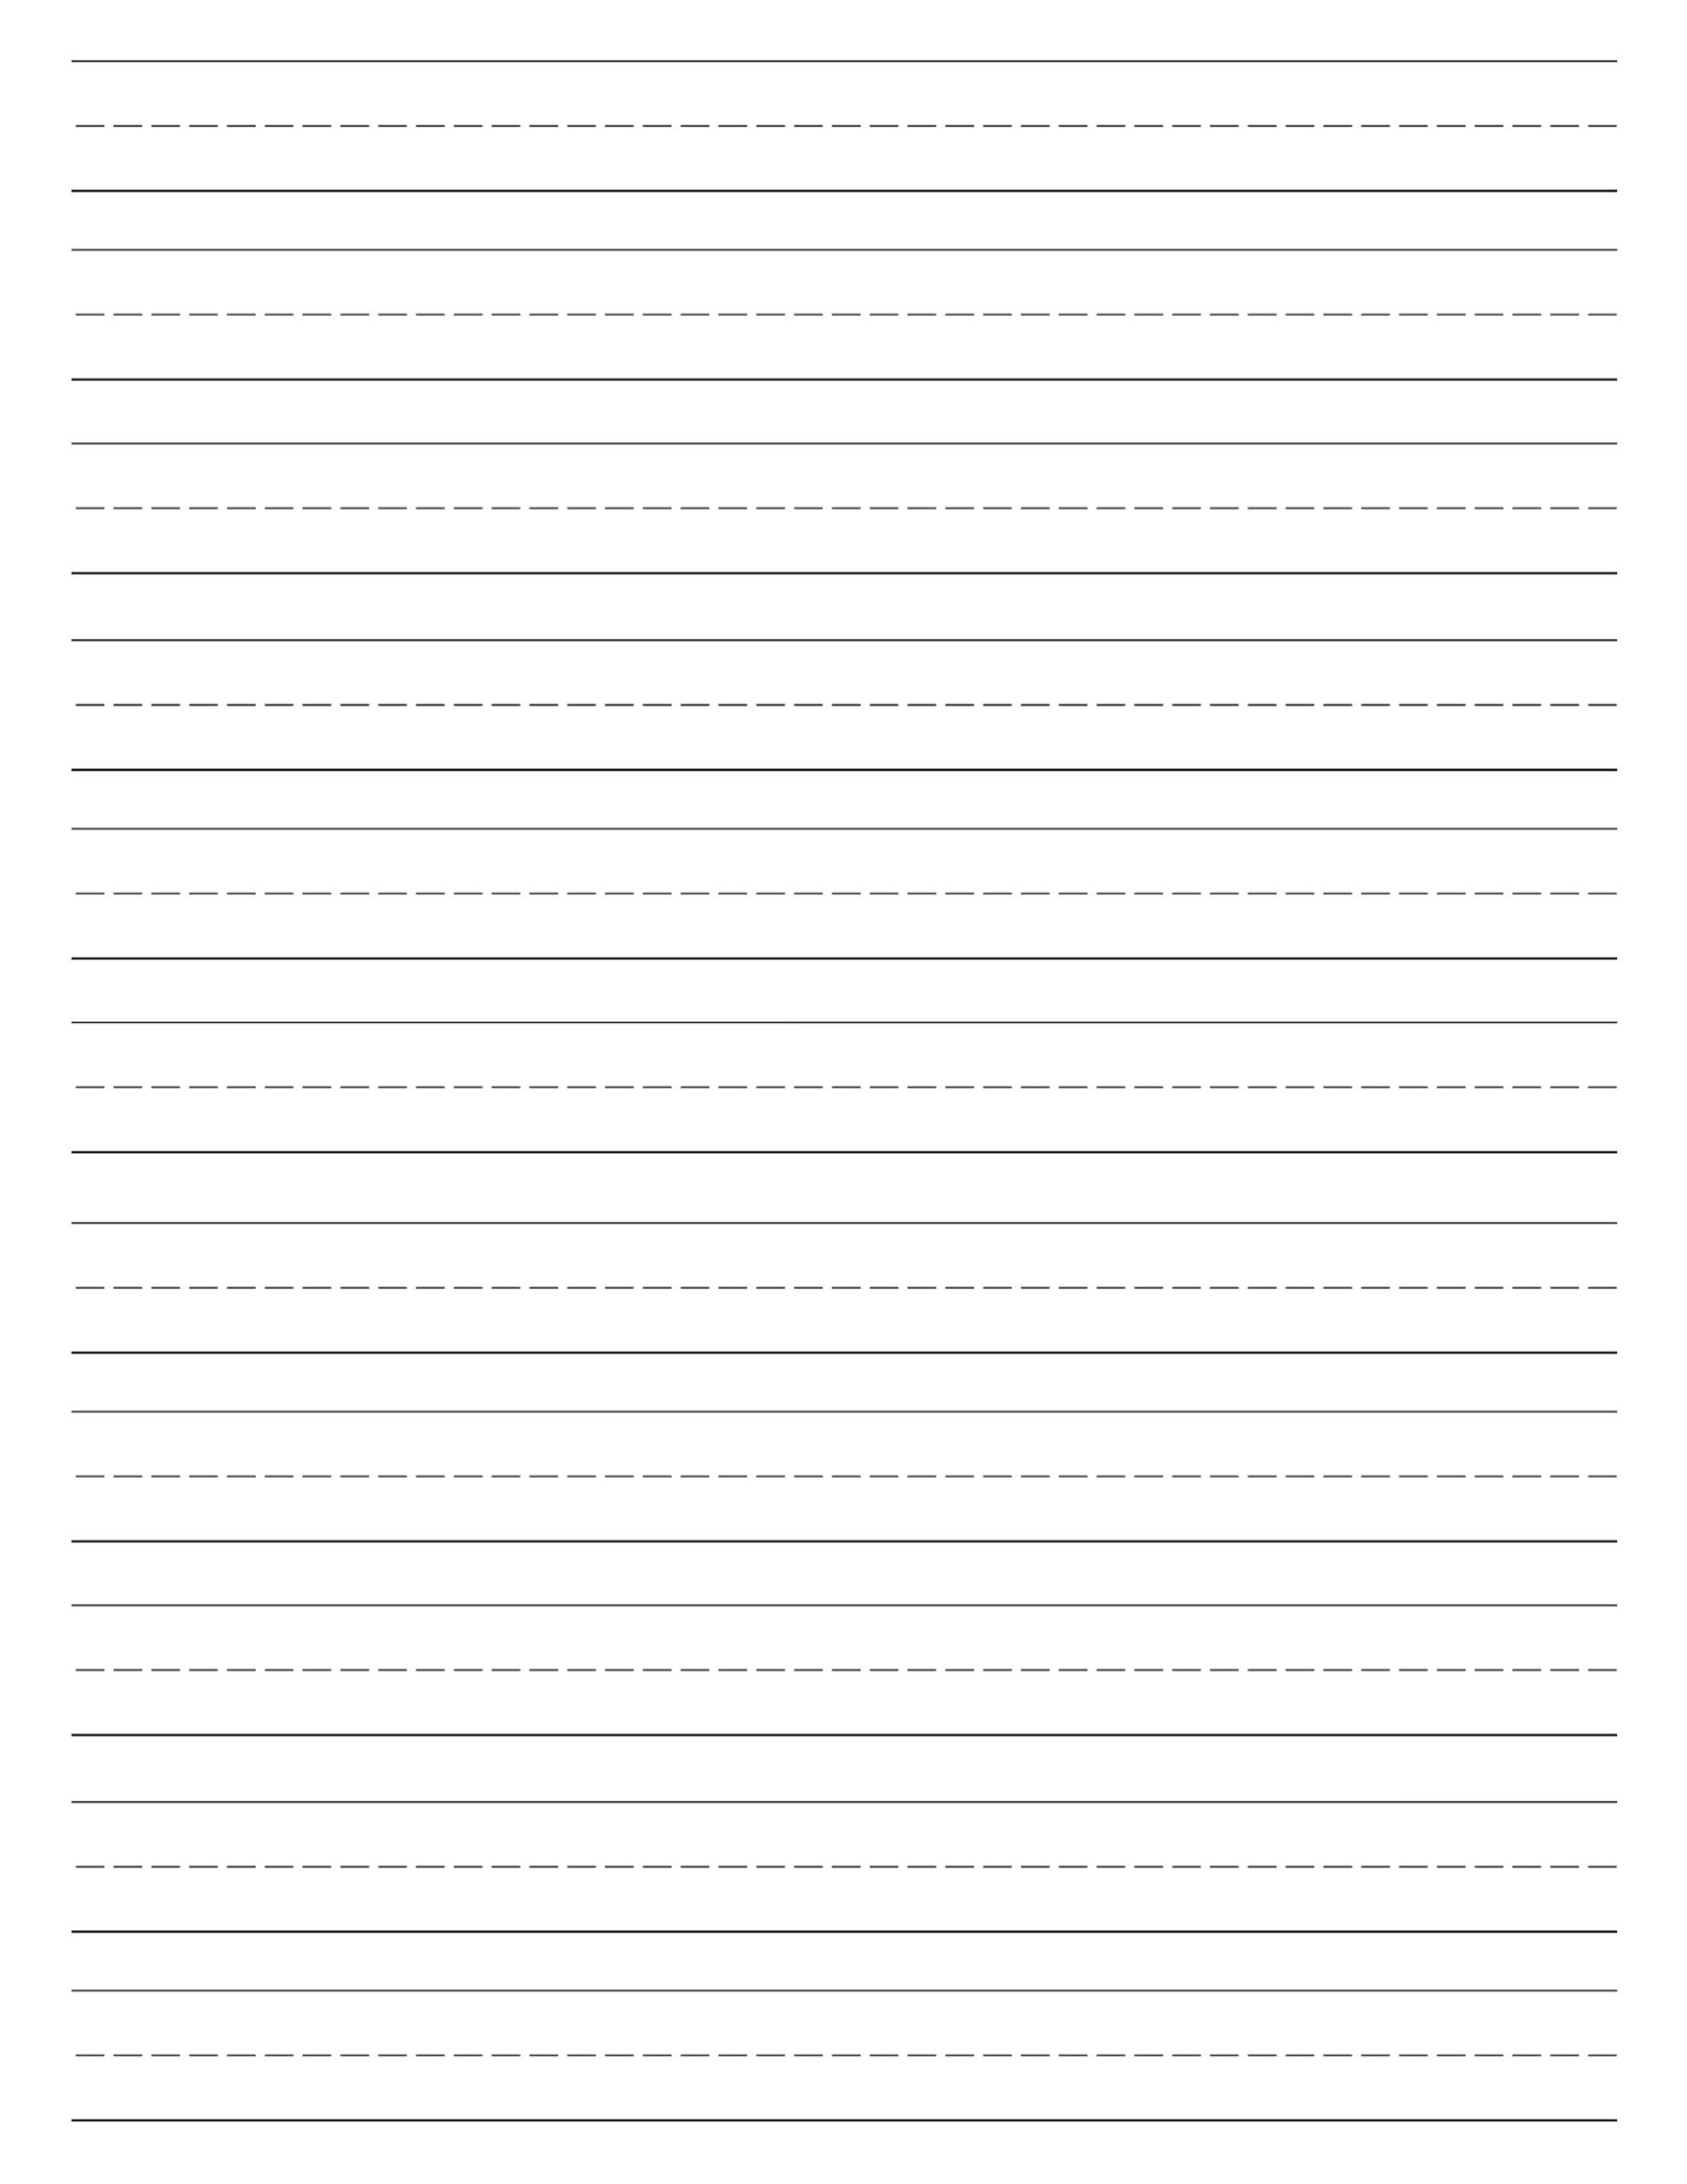 Printable Lined Paper For Writing Practice